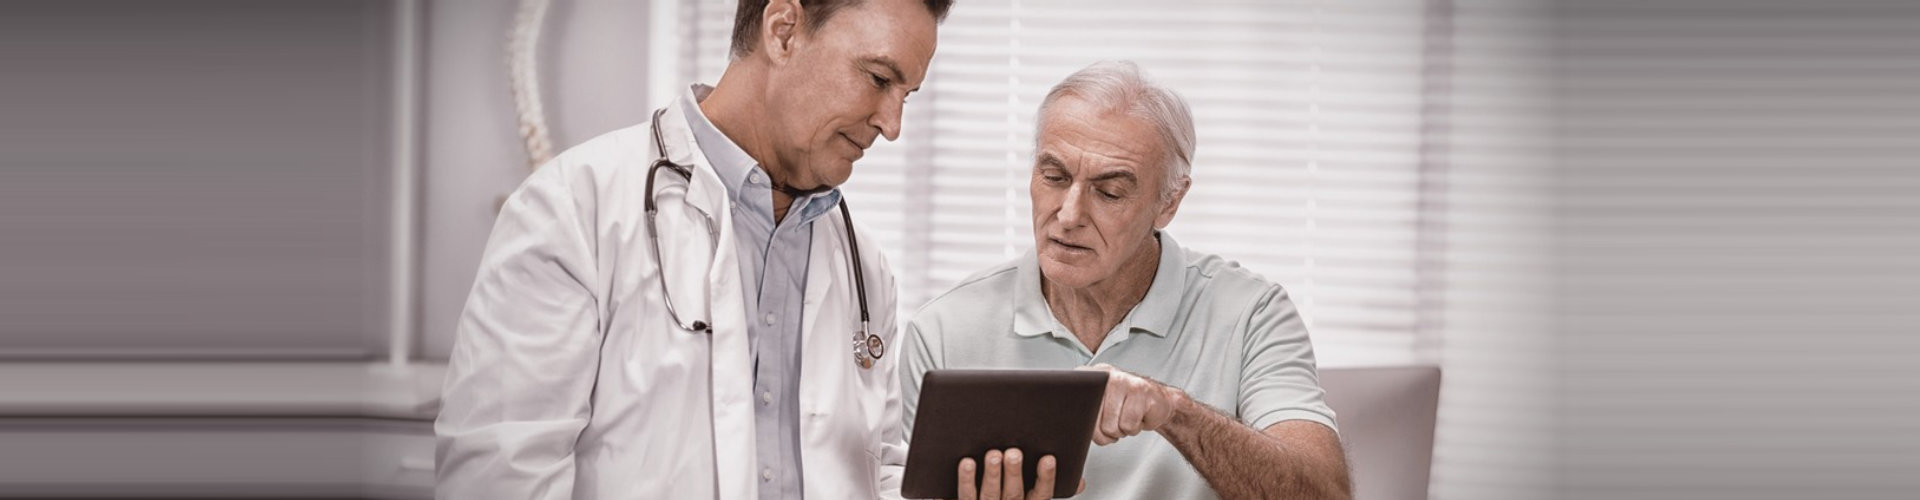 senior man consulting to doctor while using the tablet devices